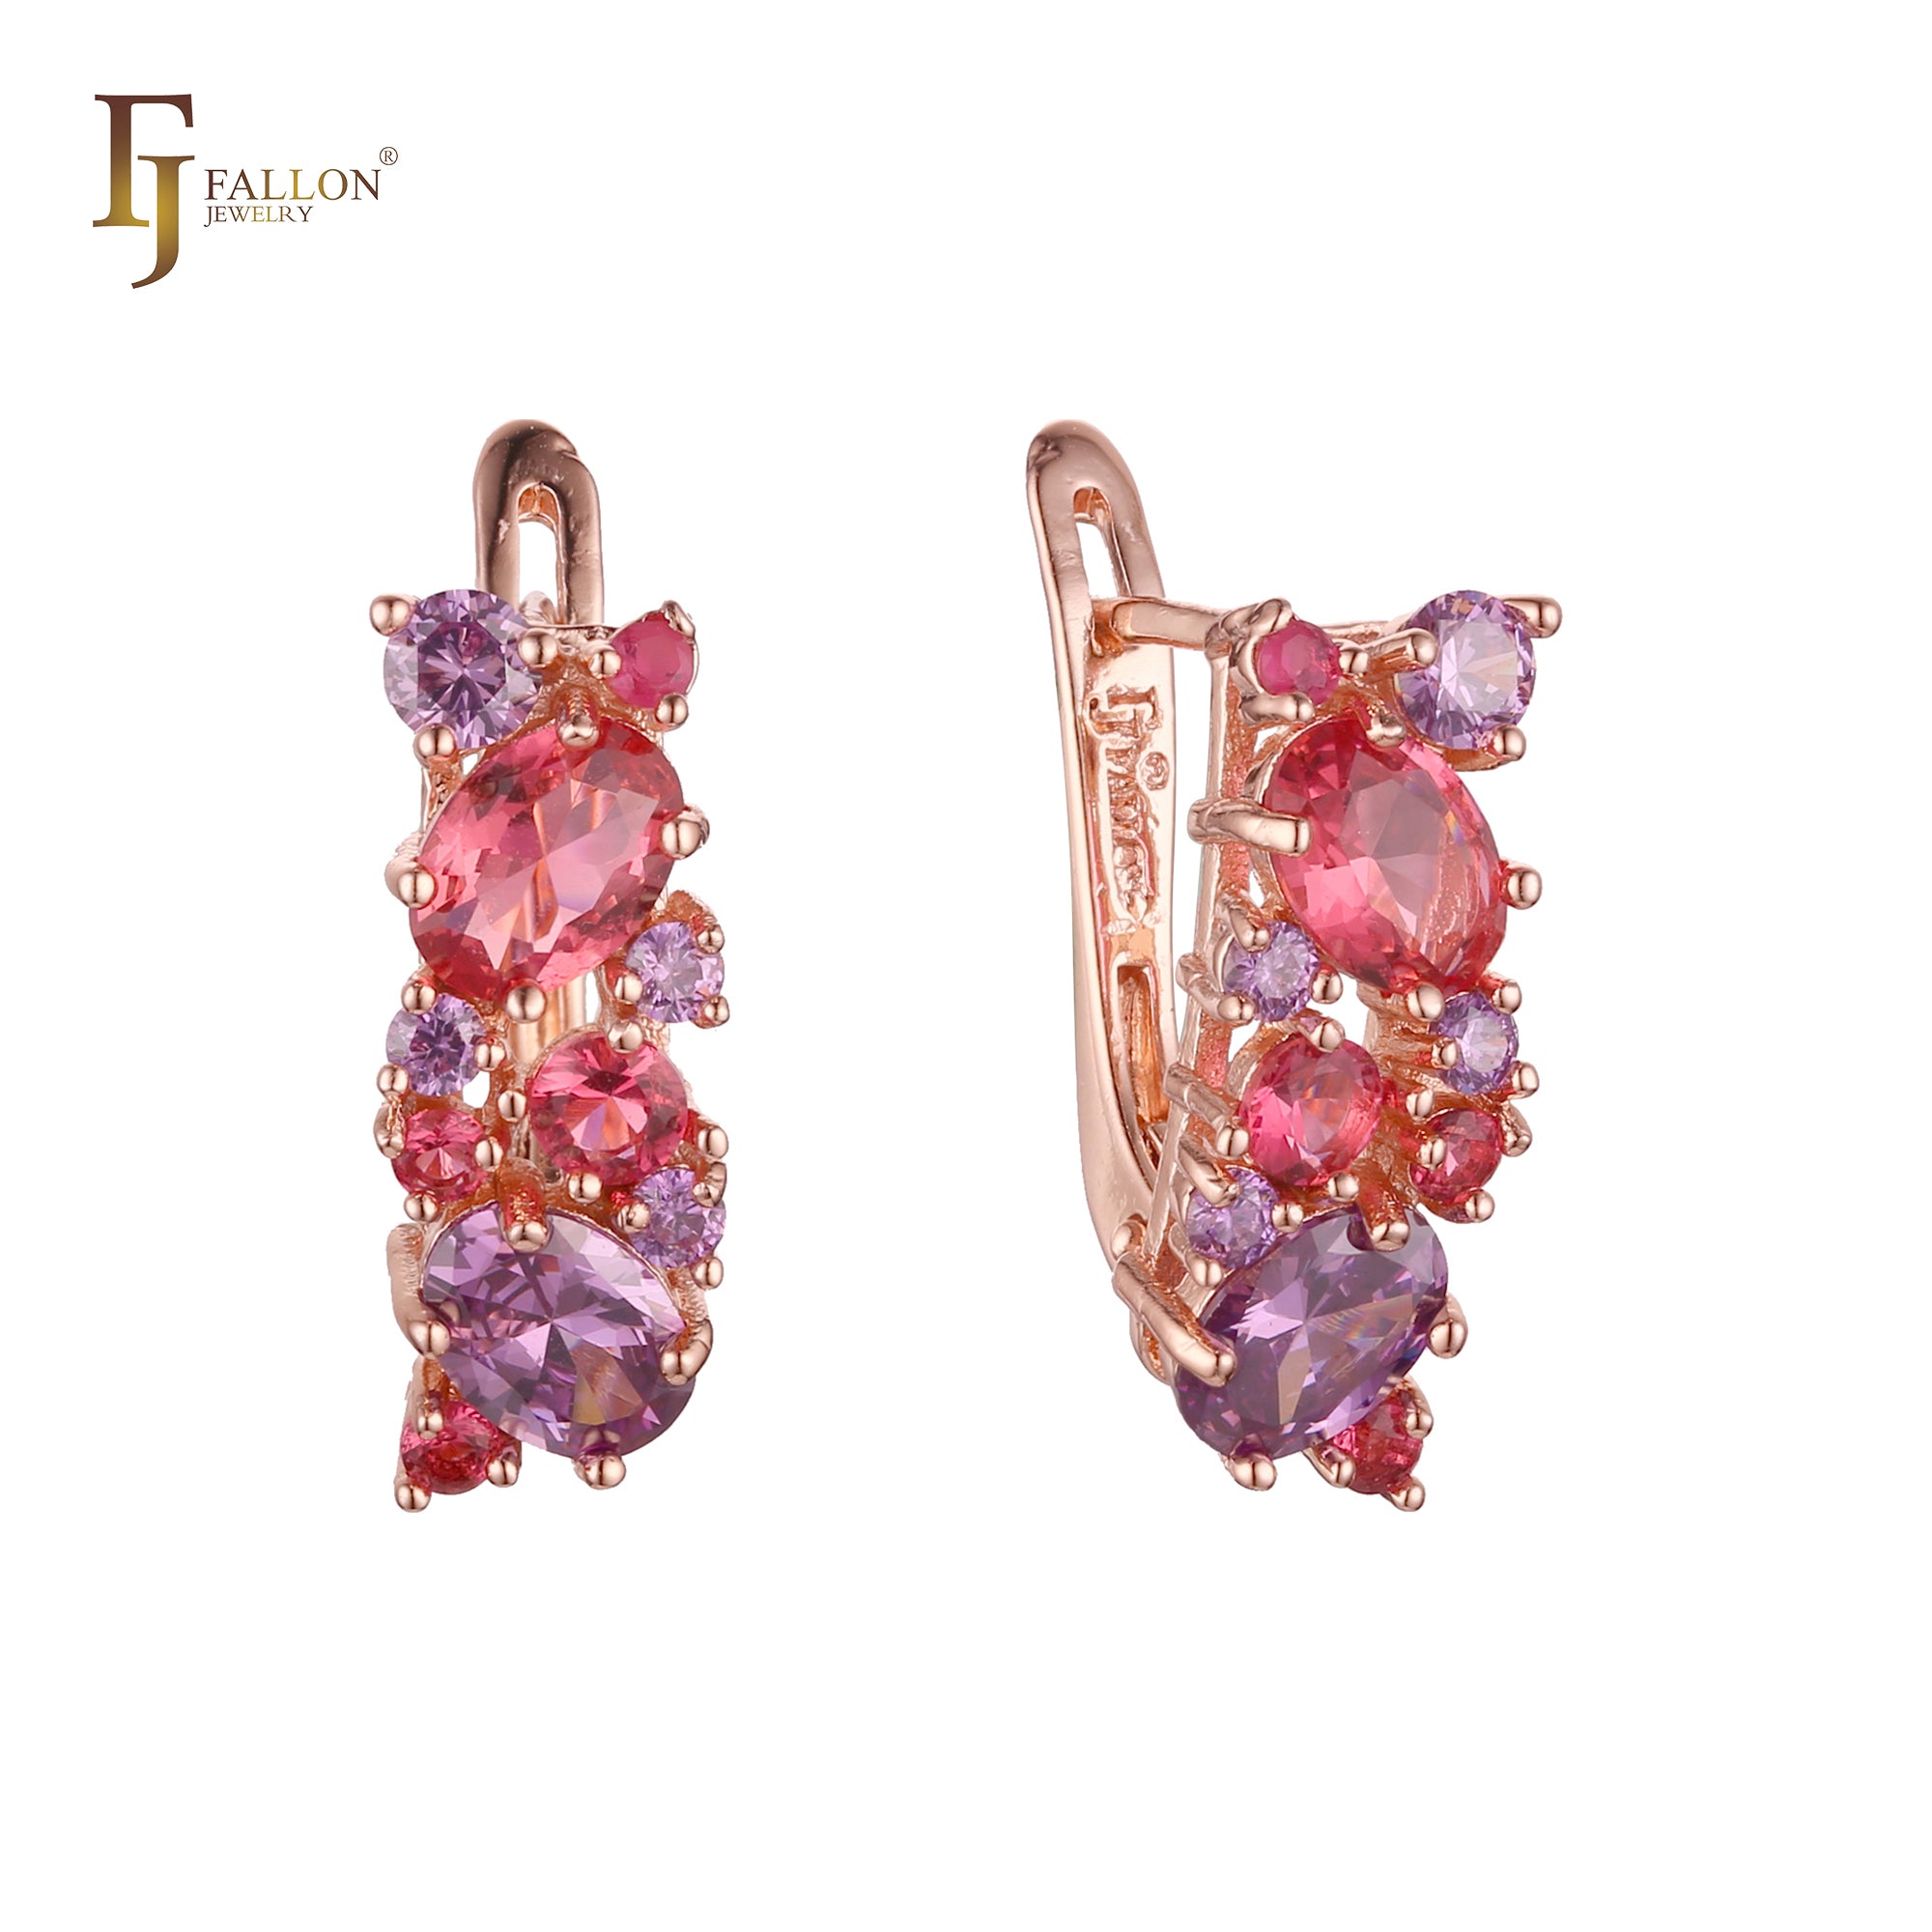 .Luxurious Colorful Cluster CZ earrings plated in 14K Gold, Rose Gold